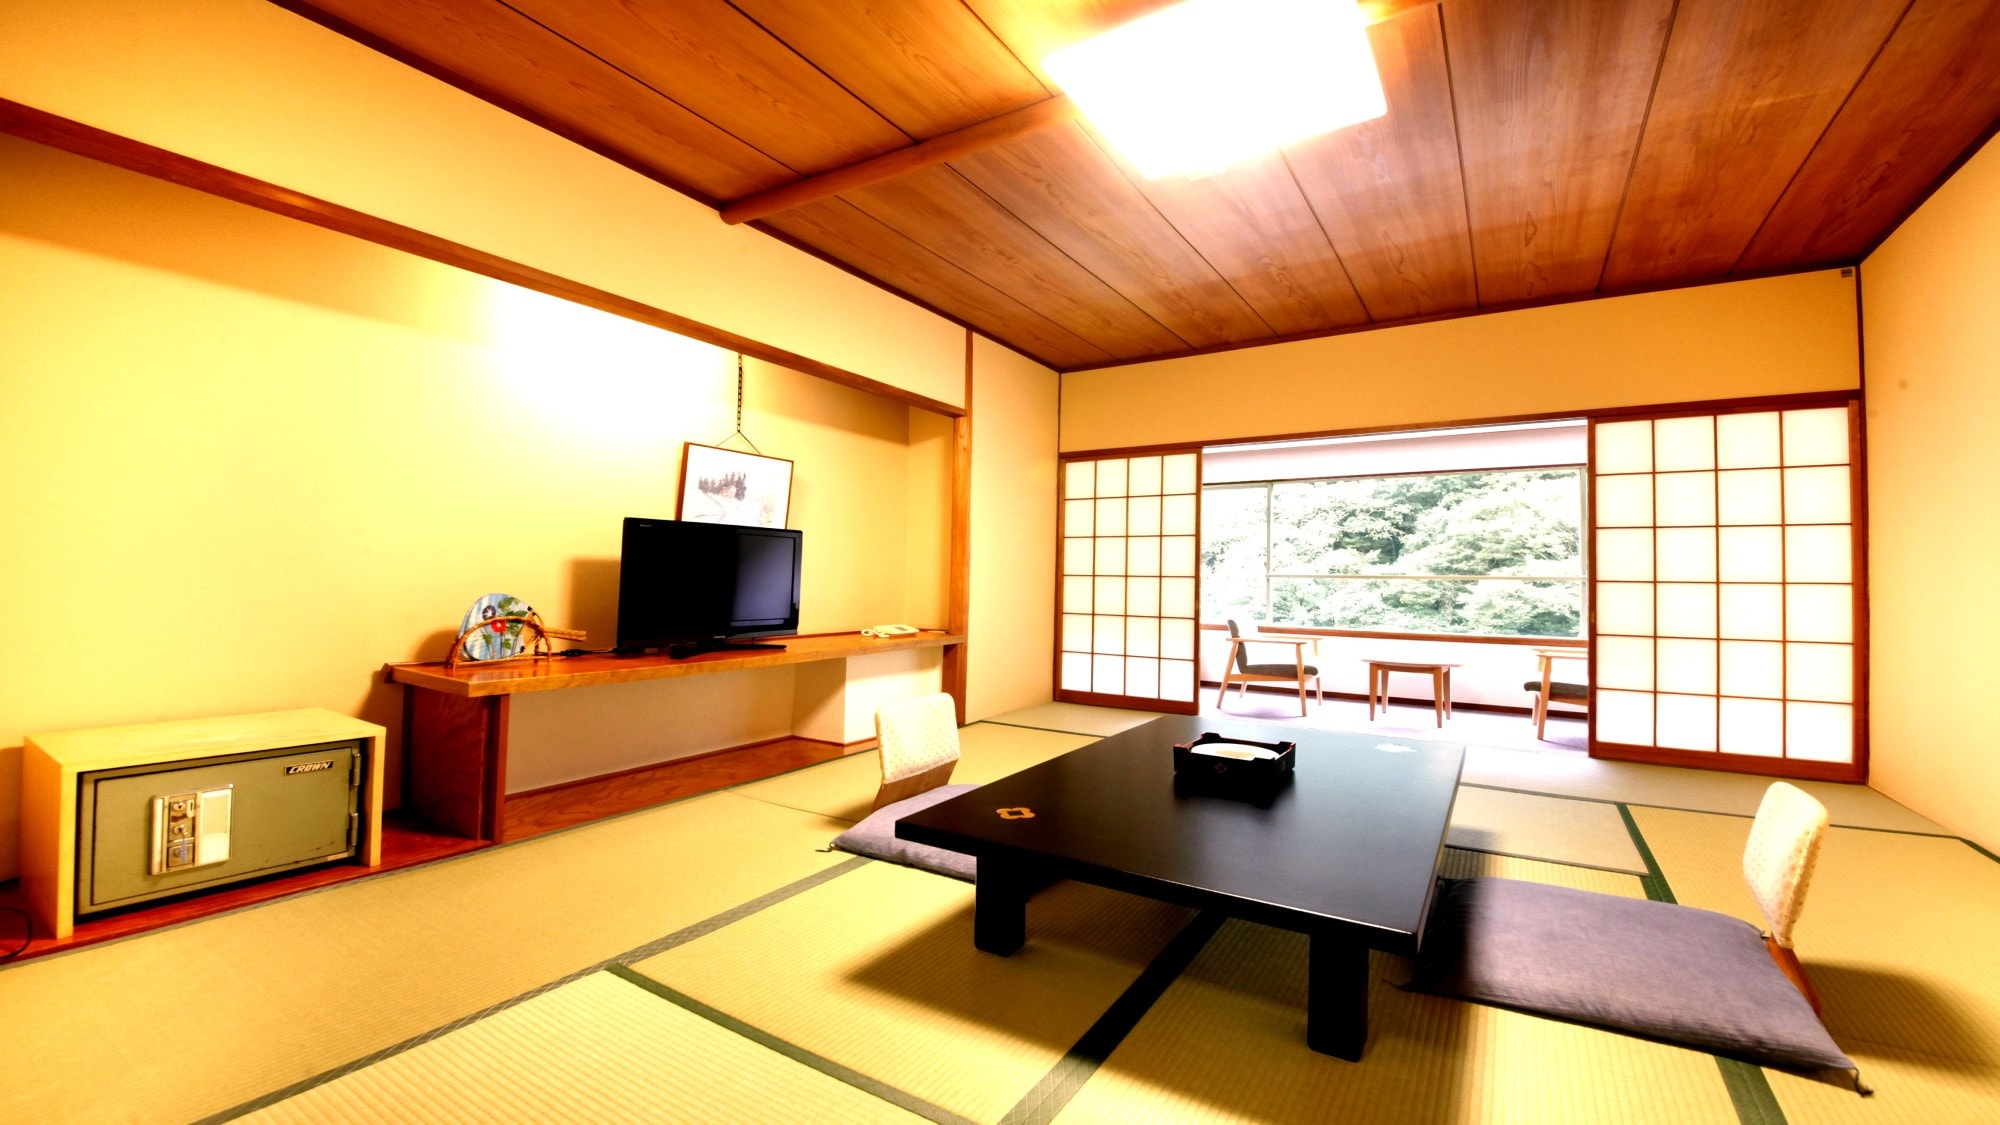 ★ Japanese-style room